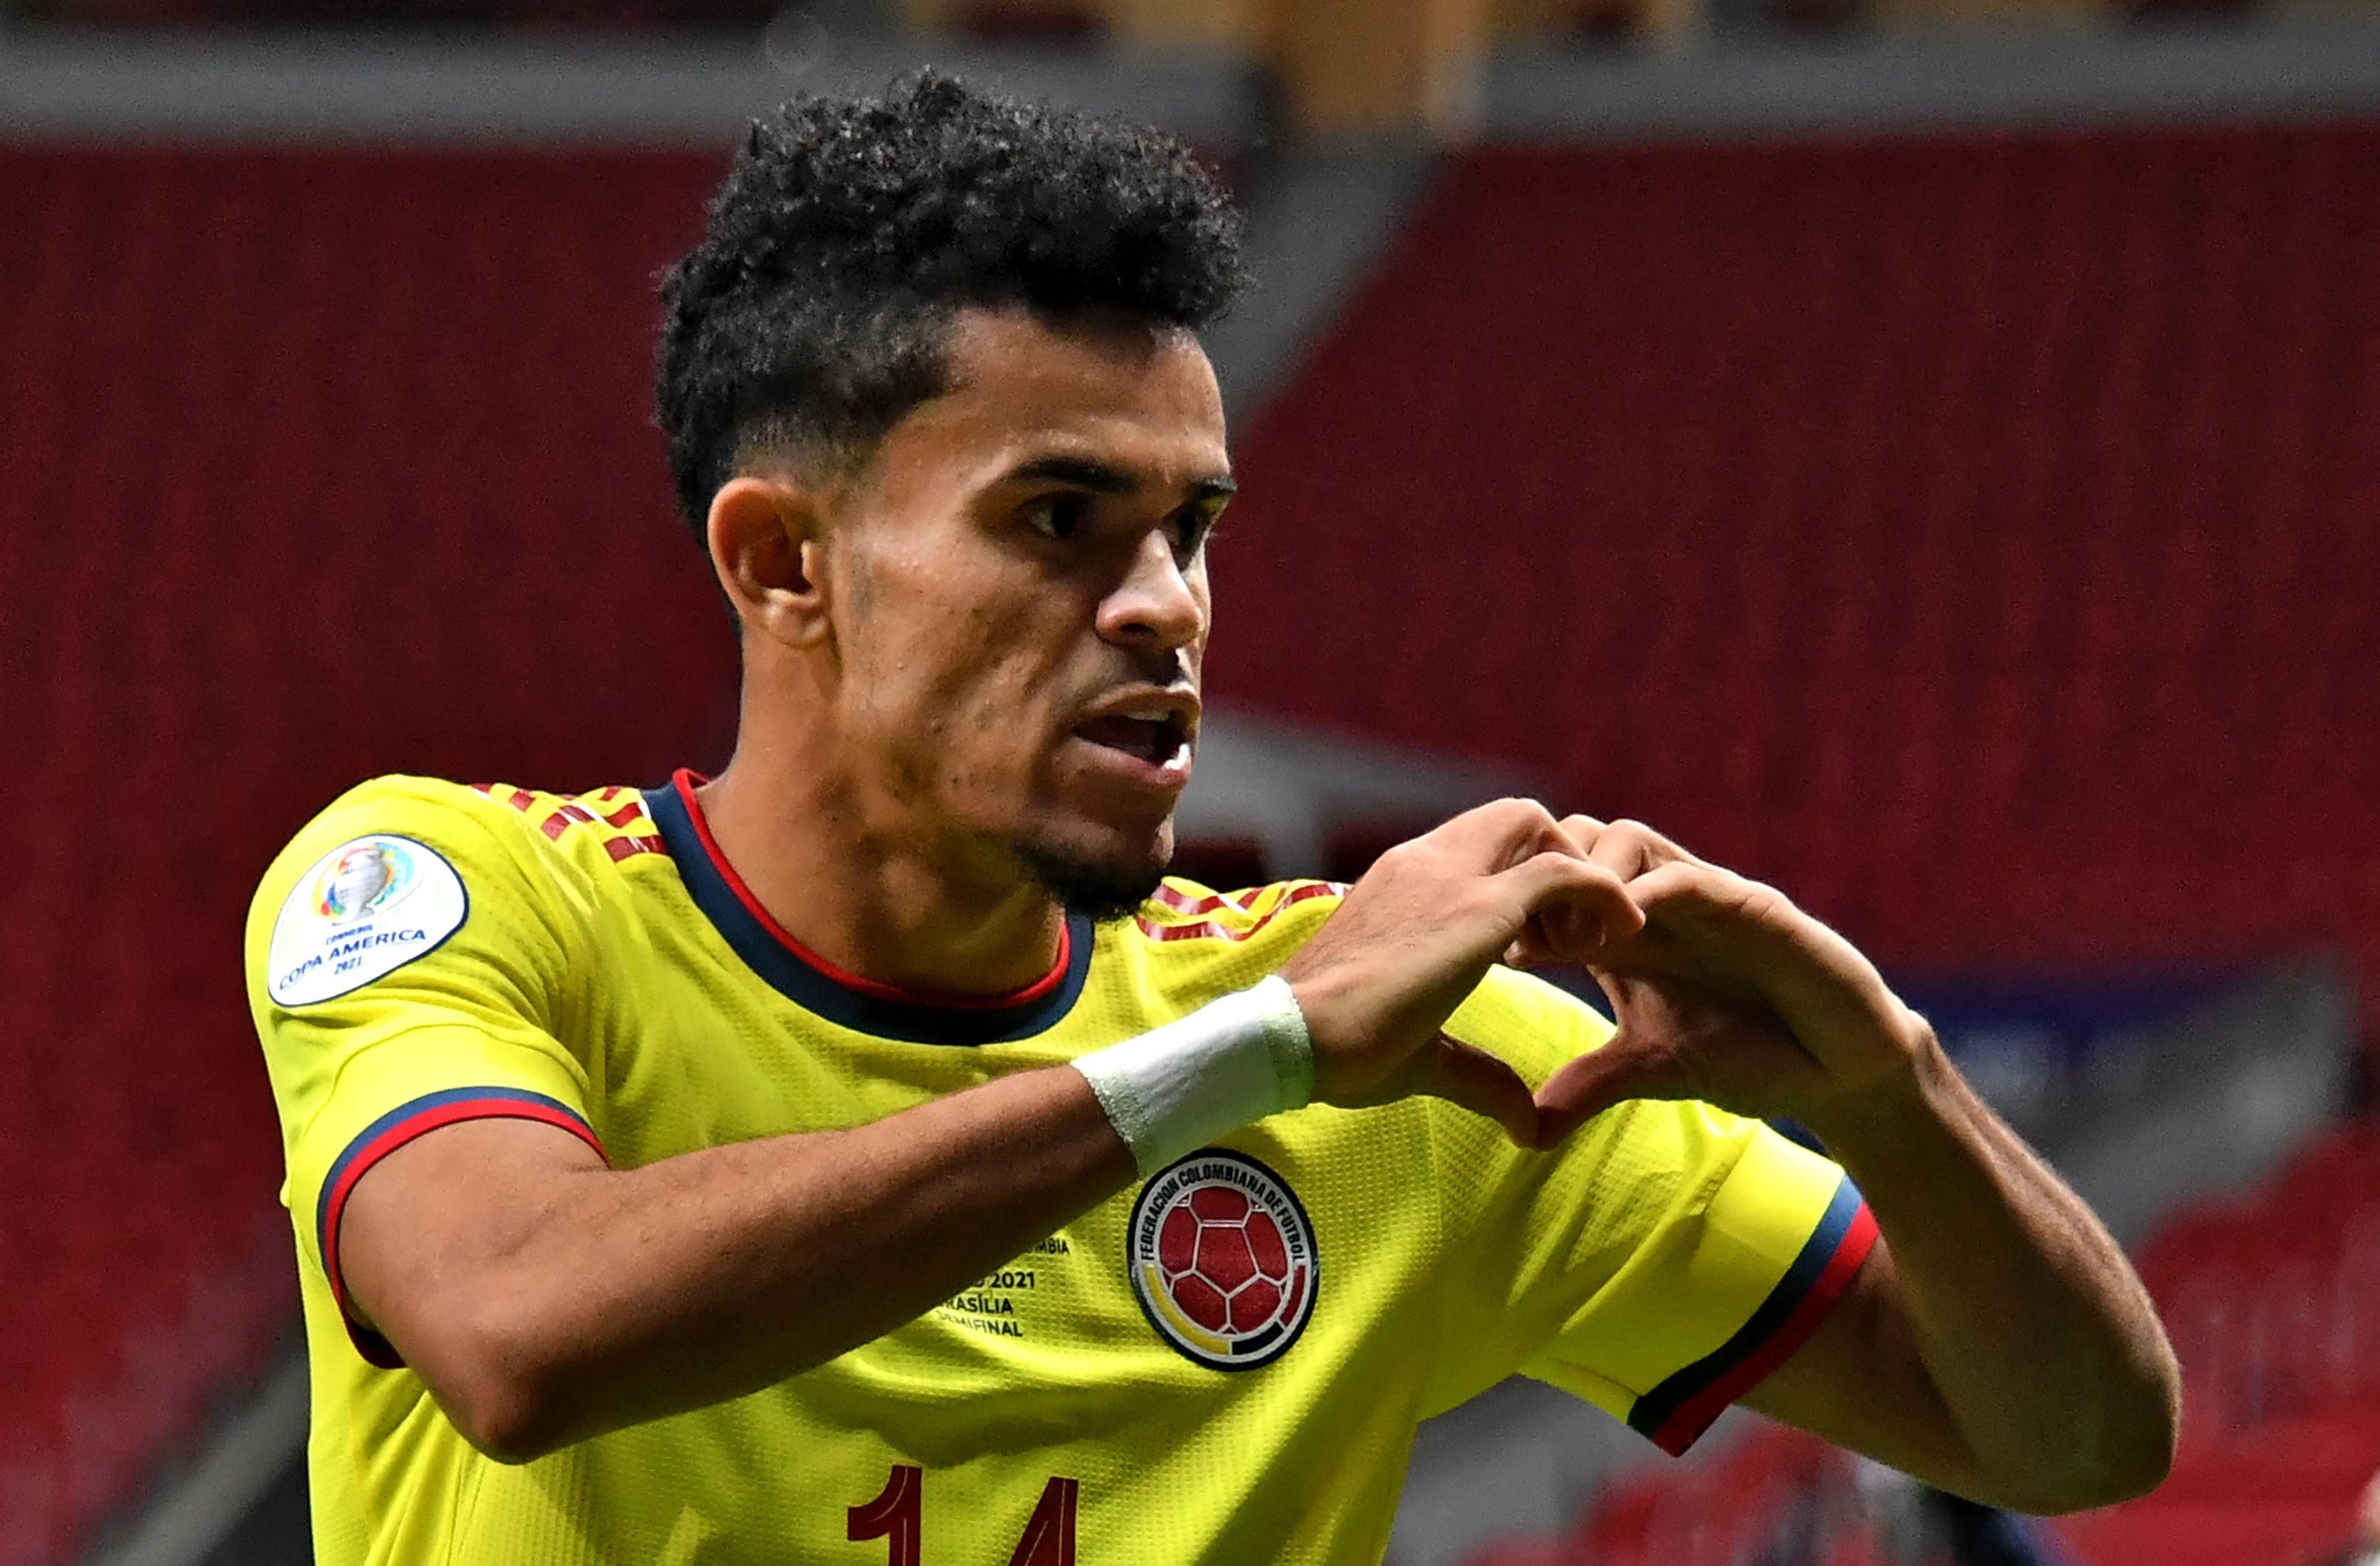 (FILES) Colombia's Luis Diaz celebrates after scoring against Argentina during their Conmebol 2021 Copa America football tournament semi-final match at the Mane Garrincha Stadium in Brasilia, Brazil, on July 6, 2021. The South American inexhaustible youth craddle is starting to replace its pool of players, many of which have just won the Champions League, the Premier League or are competing at the highest level. The list includes Vinicius Jr, Rodrygo, Juli�n �lvarez, Mac Allister, Luis D�az, and Federico Valverde, among others. (Photo by NELSON ALMEIDA / AFP)